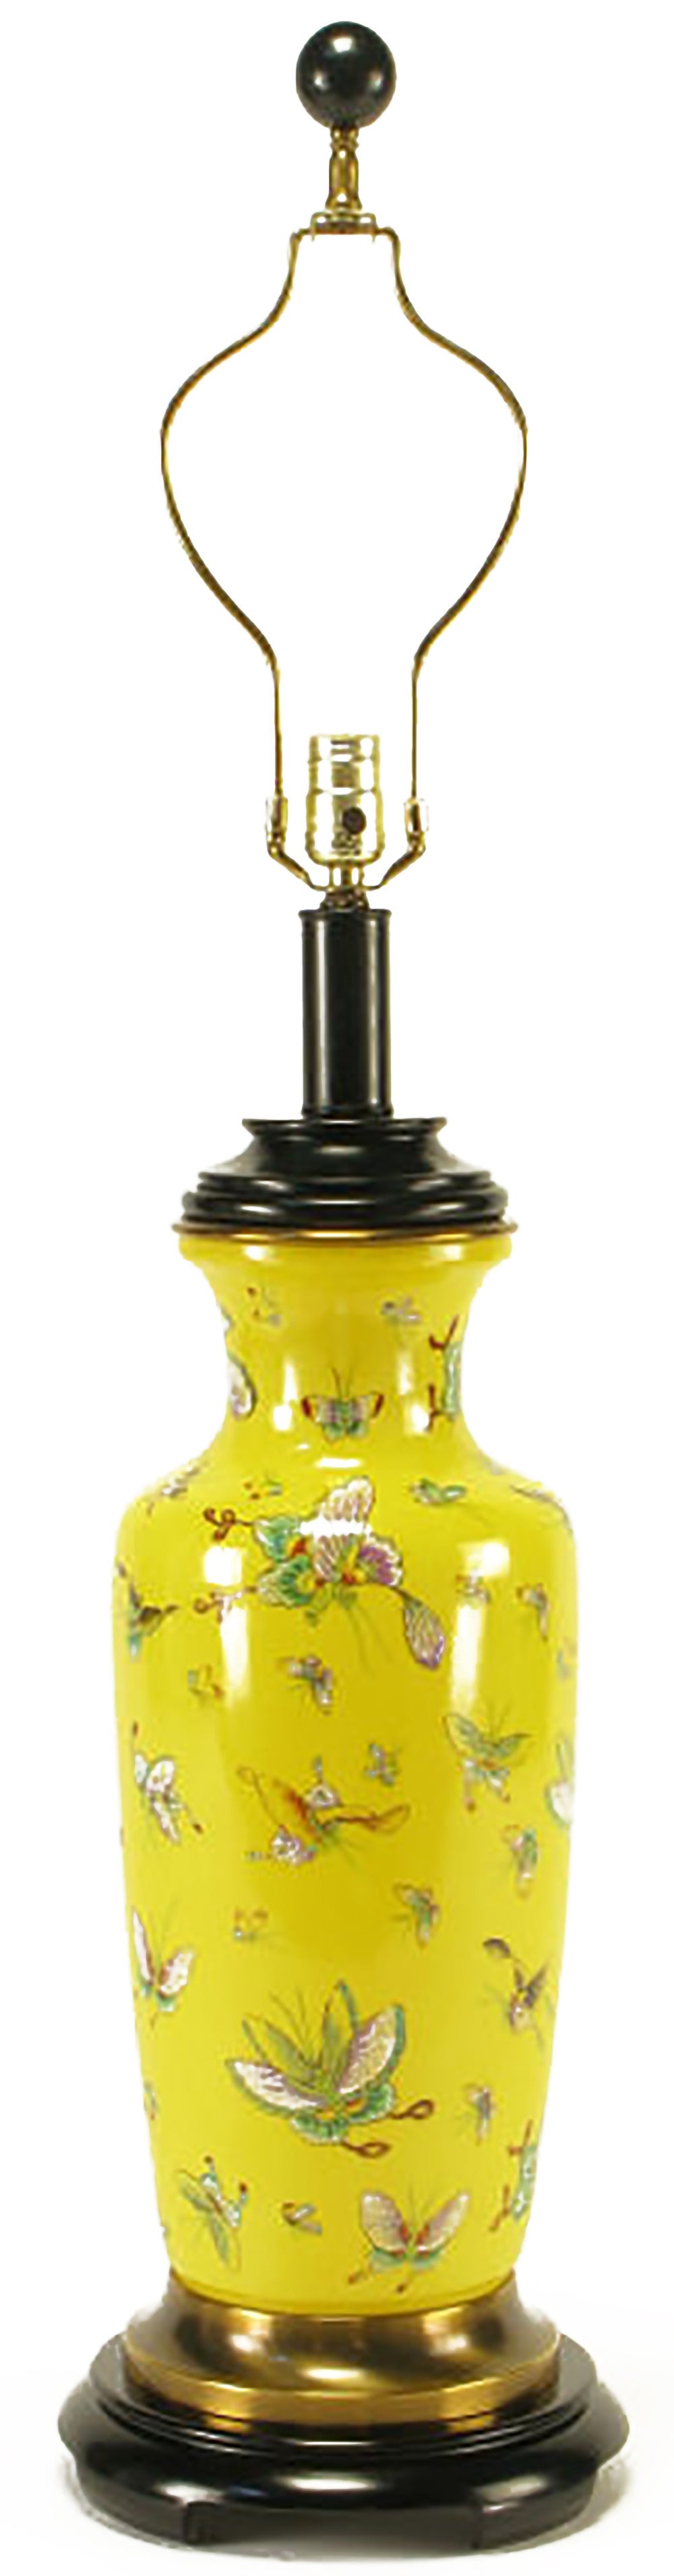 Paul Hanson lighting saffron yellow glazed chinoiserie vase form table lamp with transferware style butterflies. Black lacquered wood base, wood cap and metal stem with brass spacers. Sold sans shade.